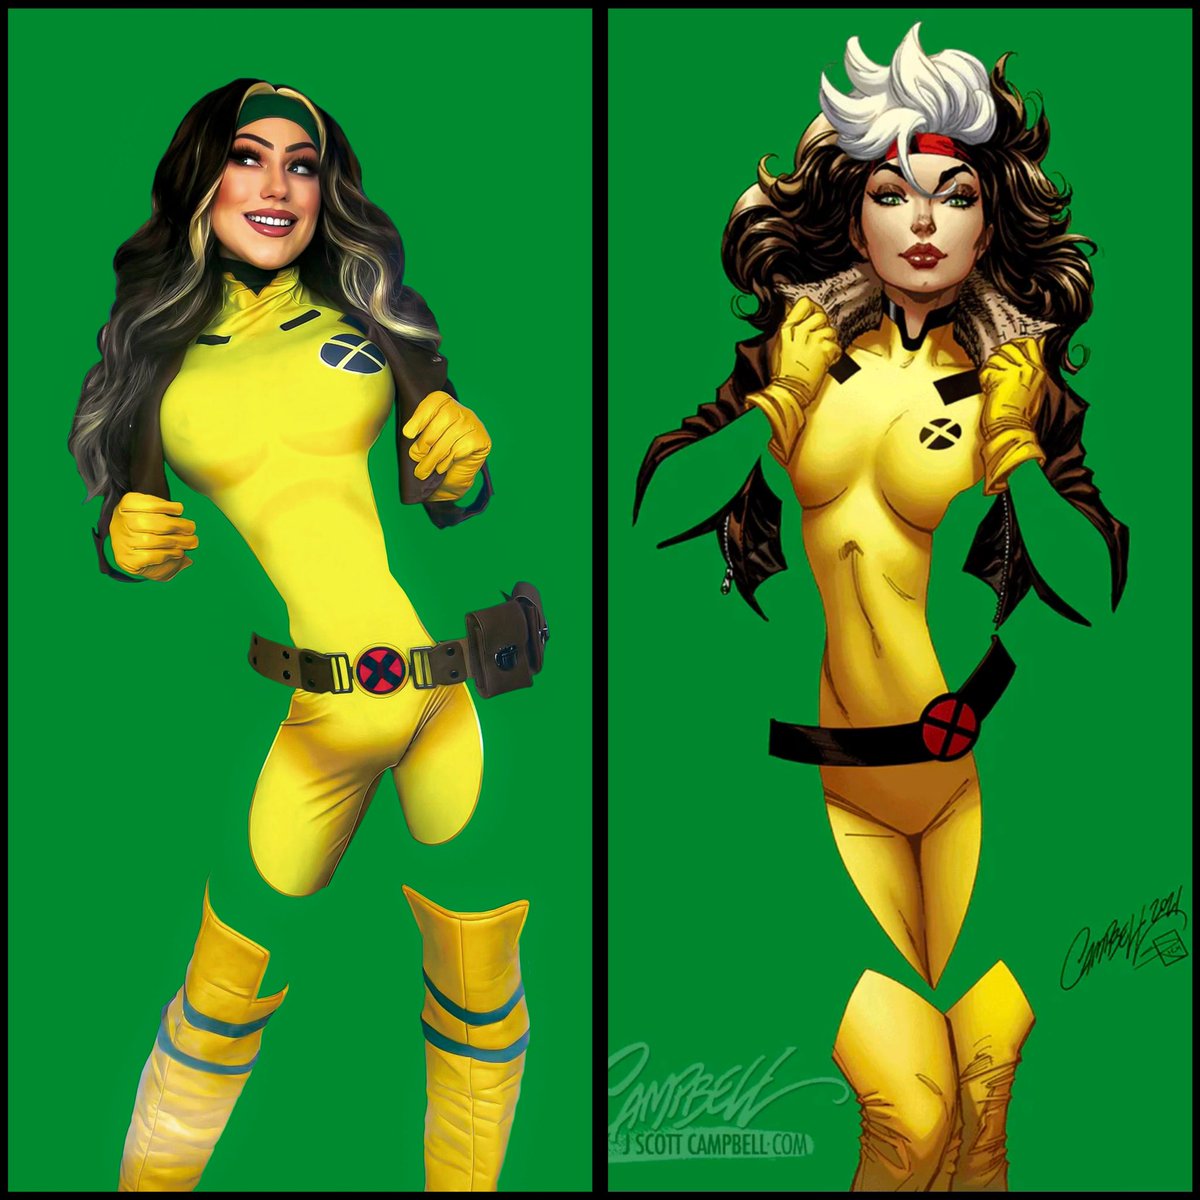 Had to do a @JScottCampbell tribute with my newest Rogue shoot! What do you guys think? #XMen97 @ZannLenore